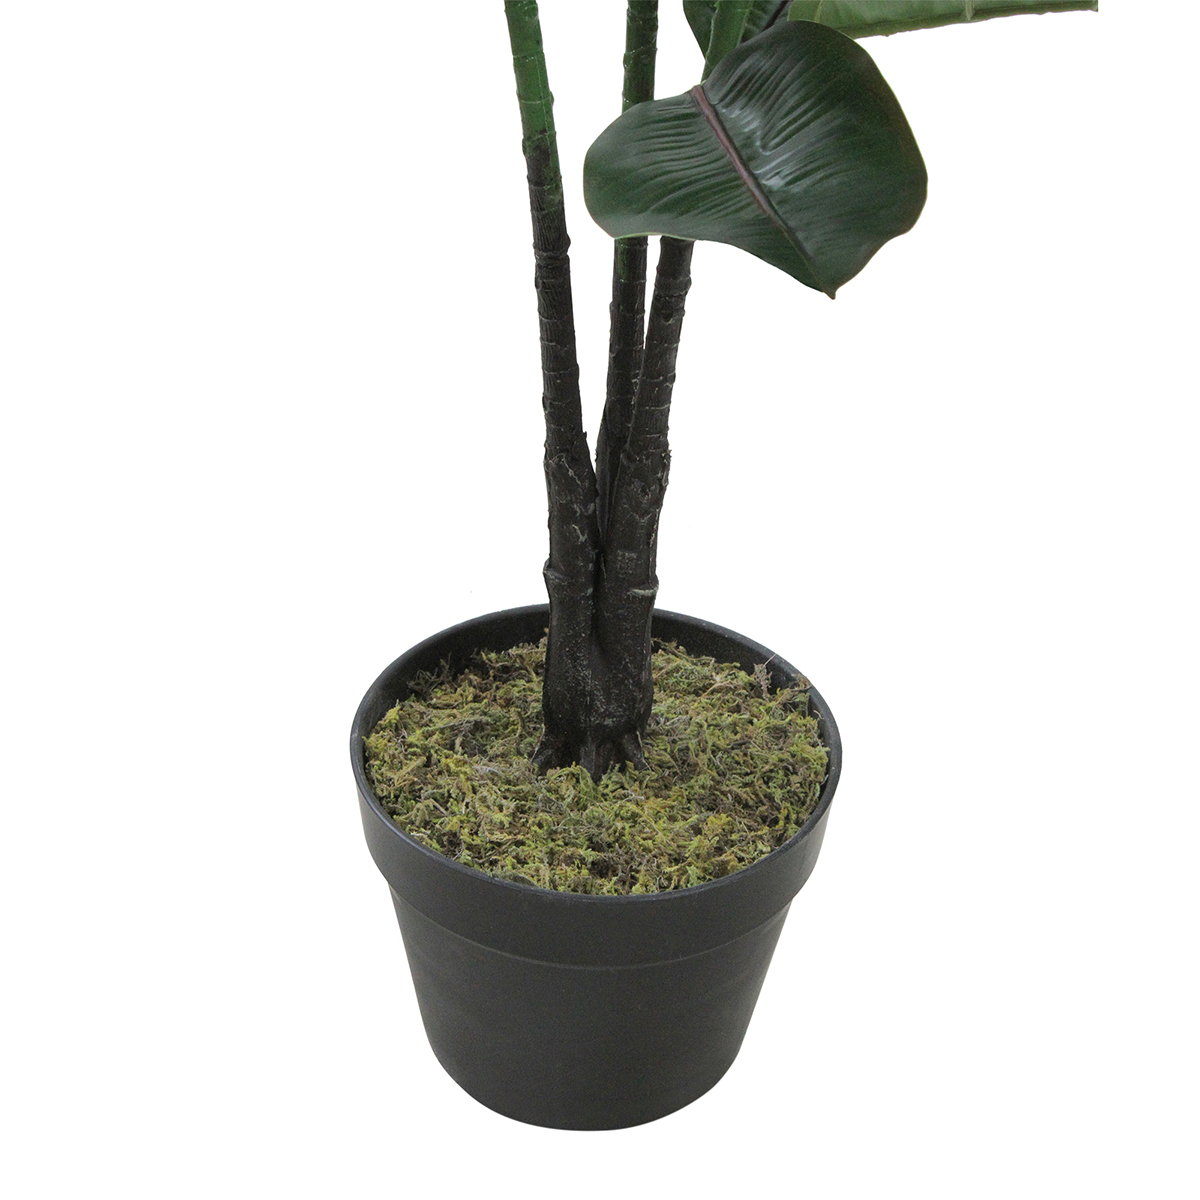 Northlight Seasonal 51in. Unlit Artificial Potted Plant